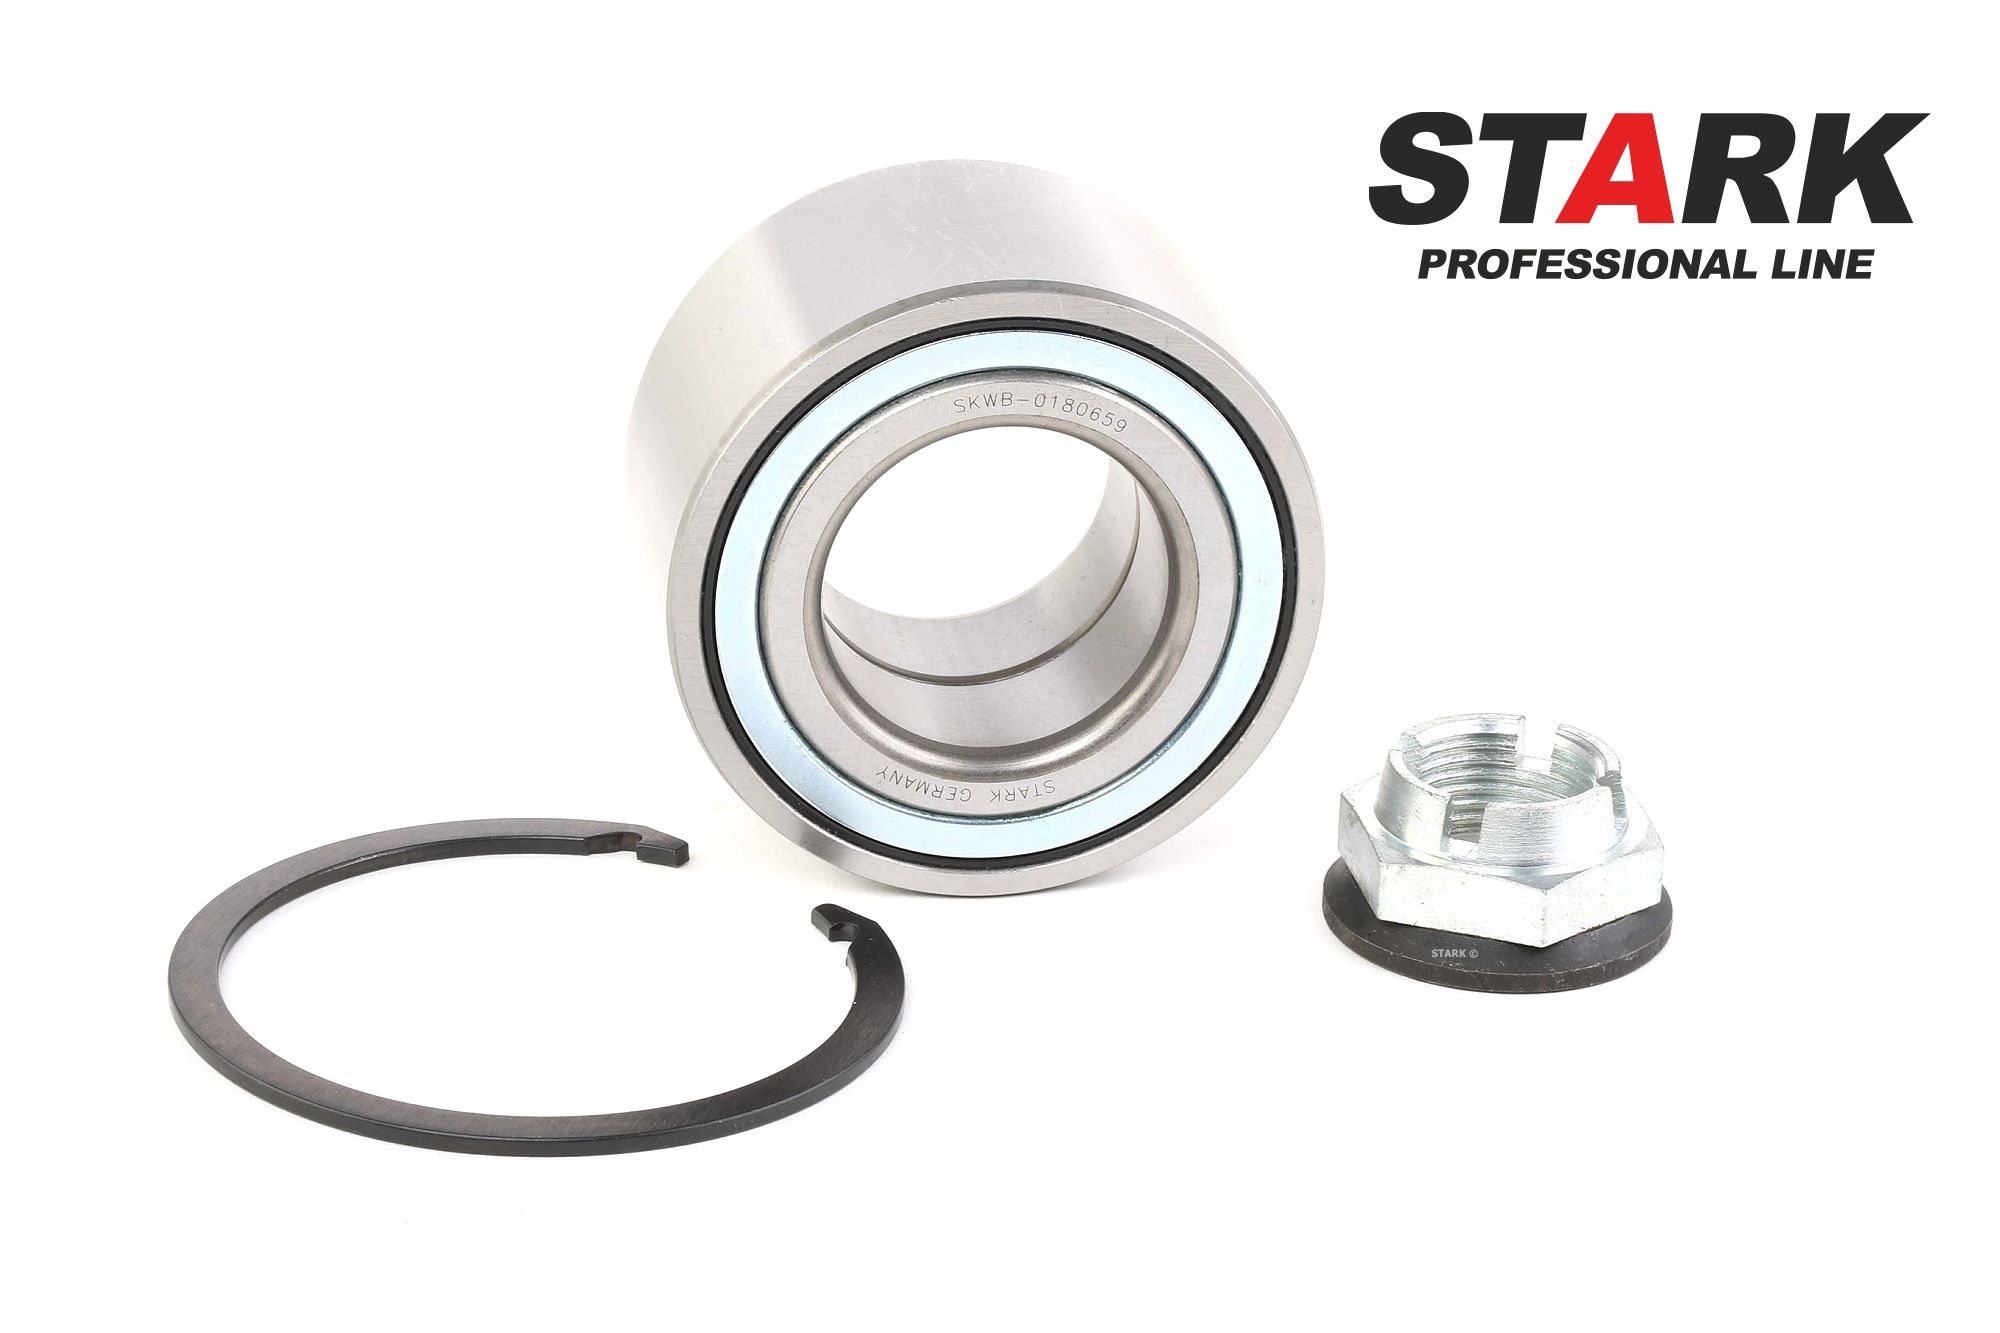 STARK SKWB-0180659 Wheel bearing kit Front axle both sides, Rear Axle both sides, 80,00 mm